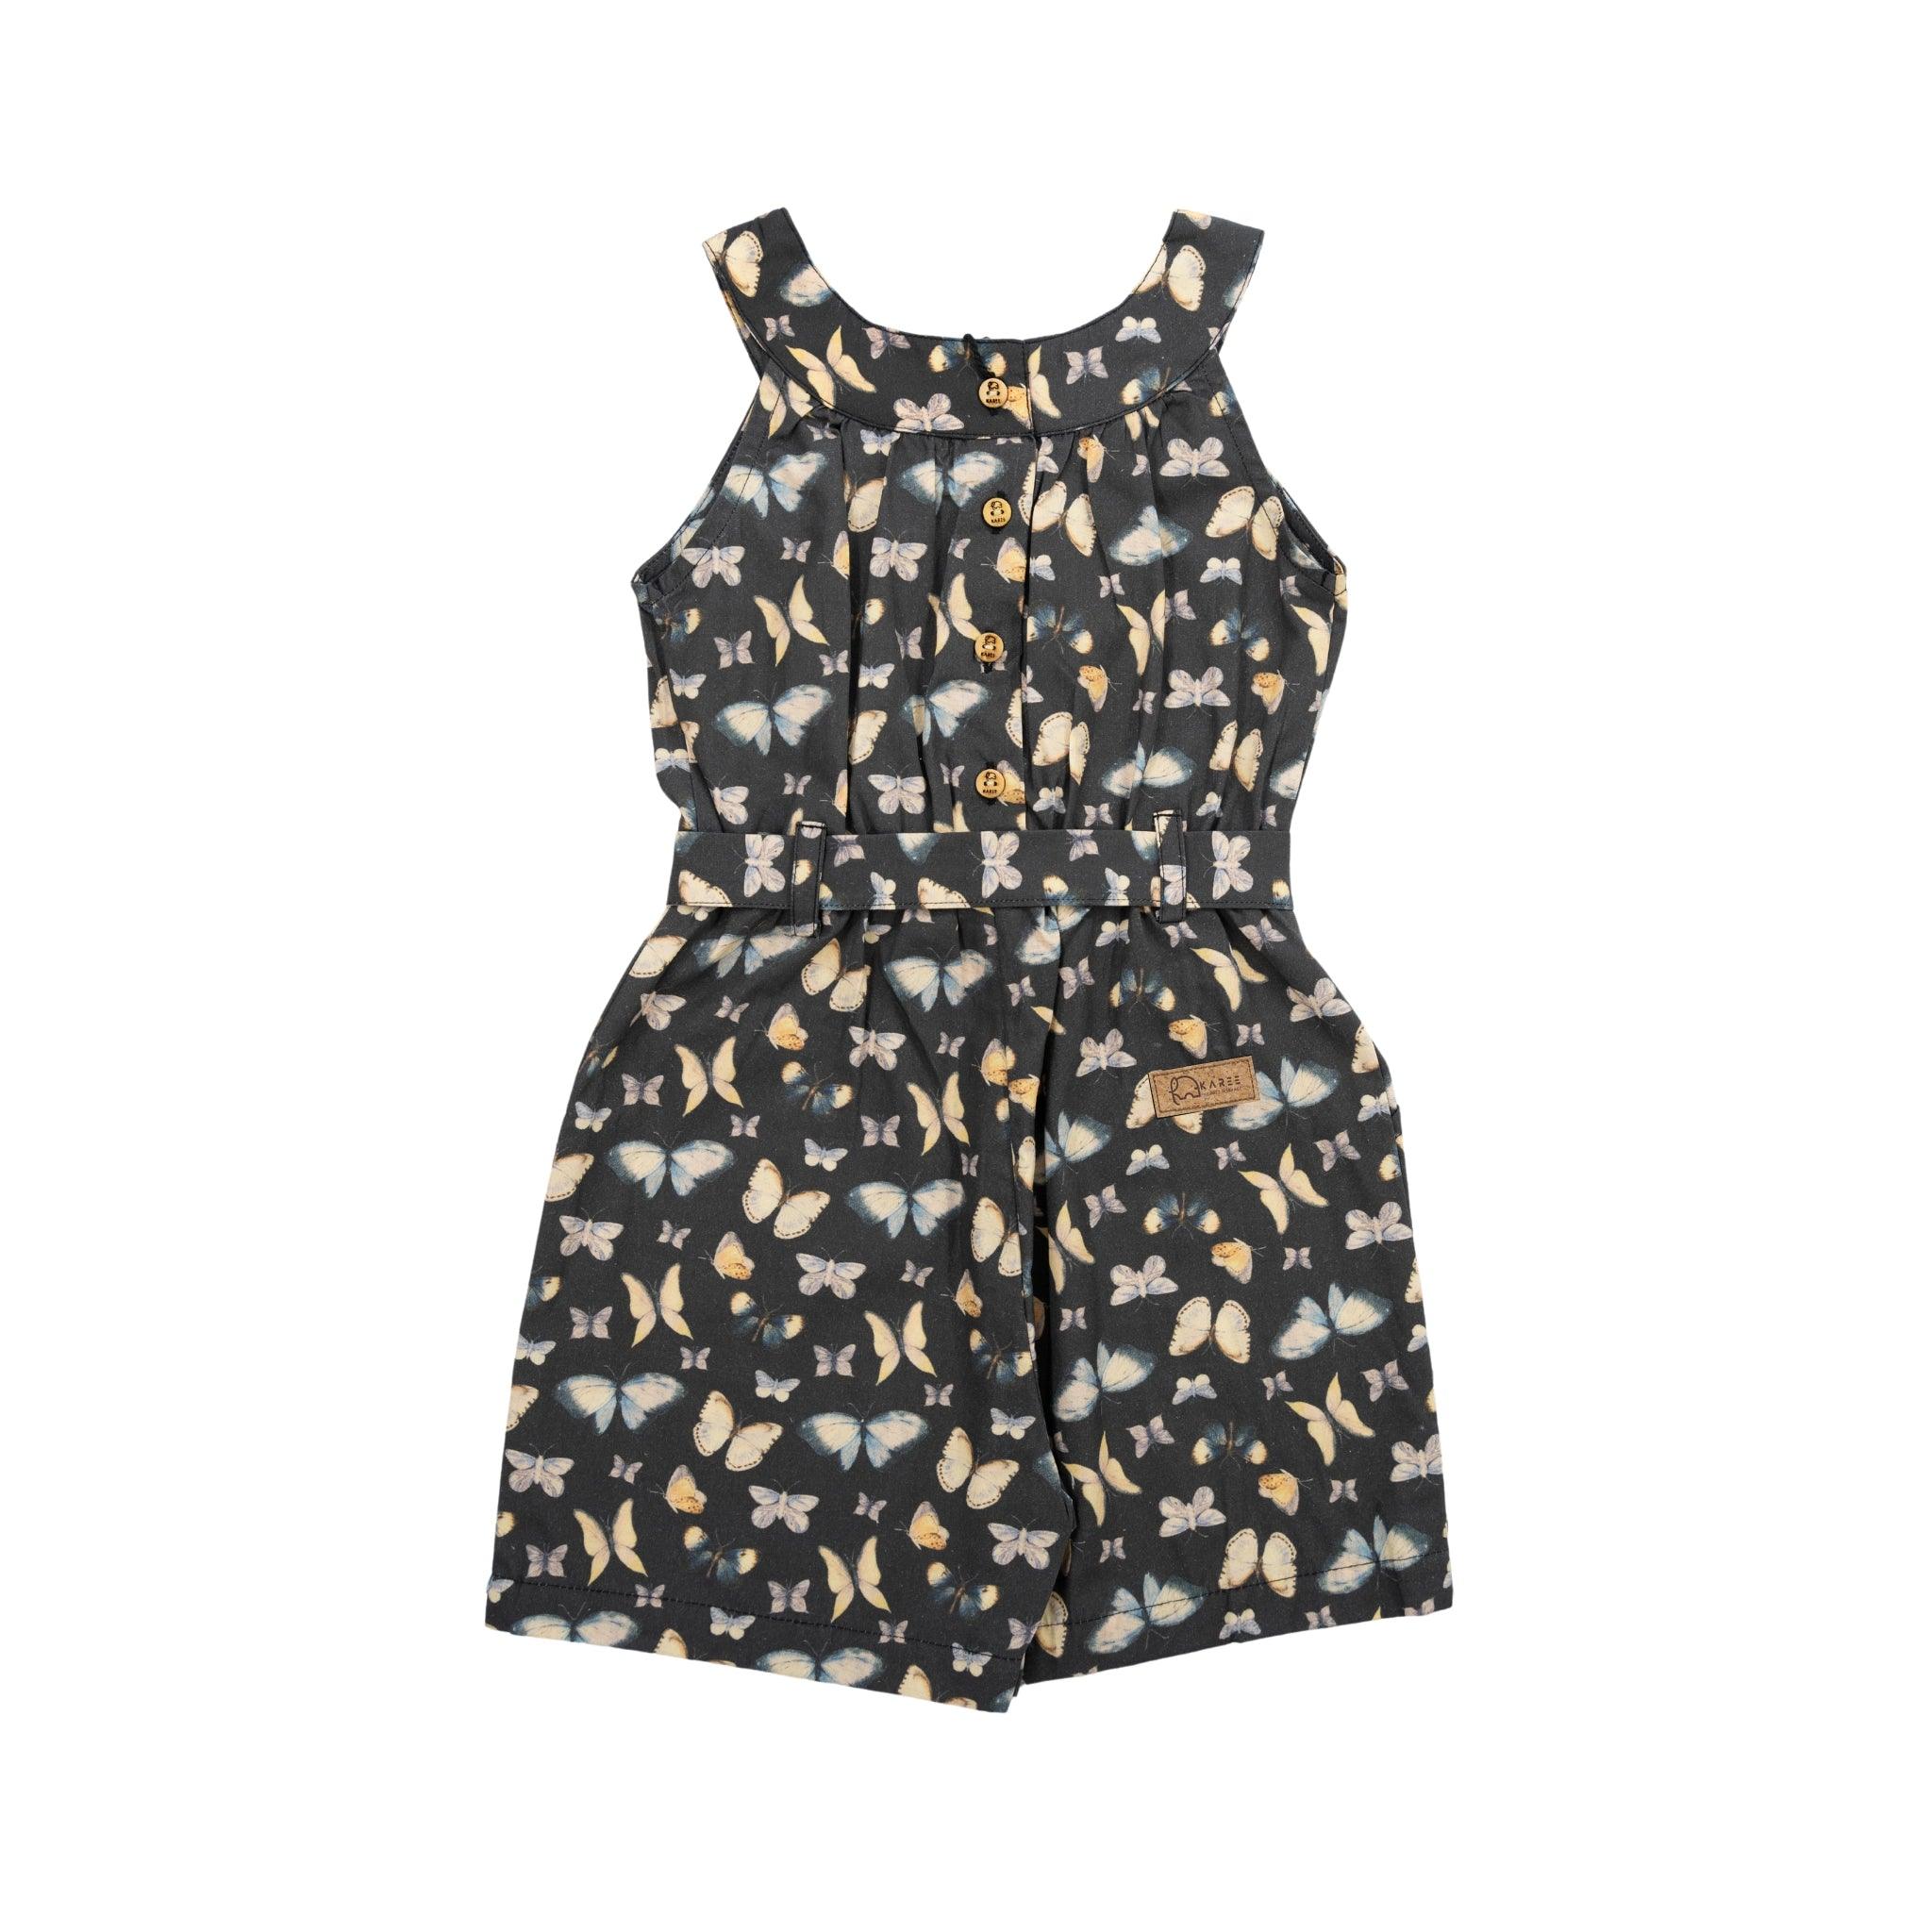 Sleeveless Pirate Black Adventure-ready Cotton Play Suit with a floral pattern and front button details, displayed against a white background by Karee.